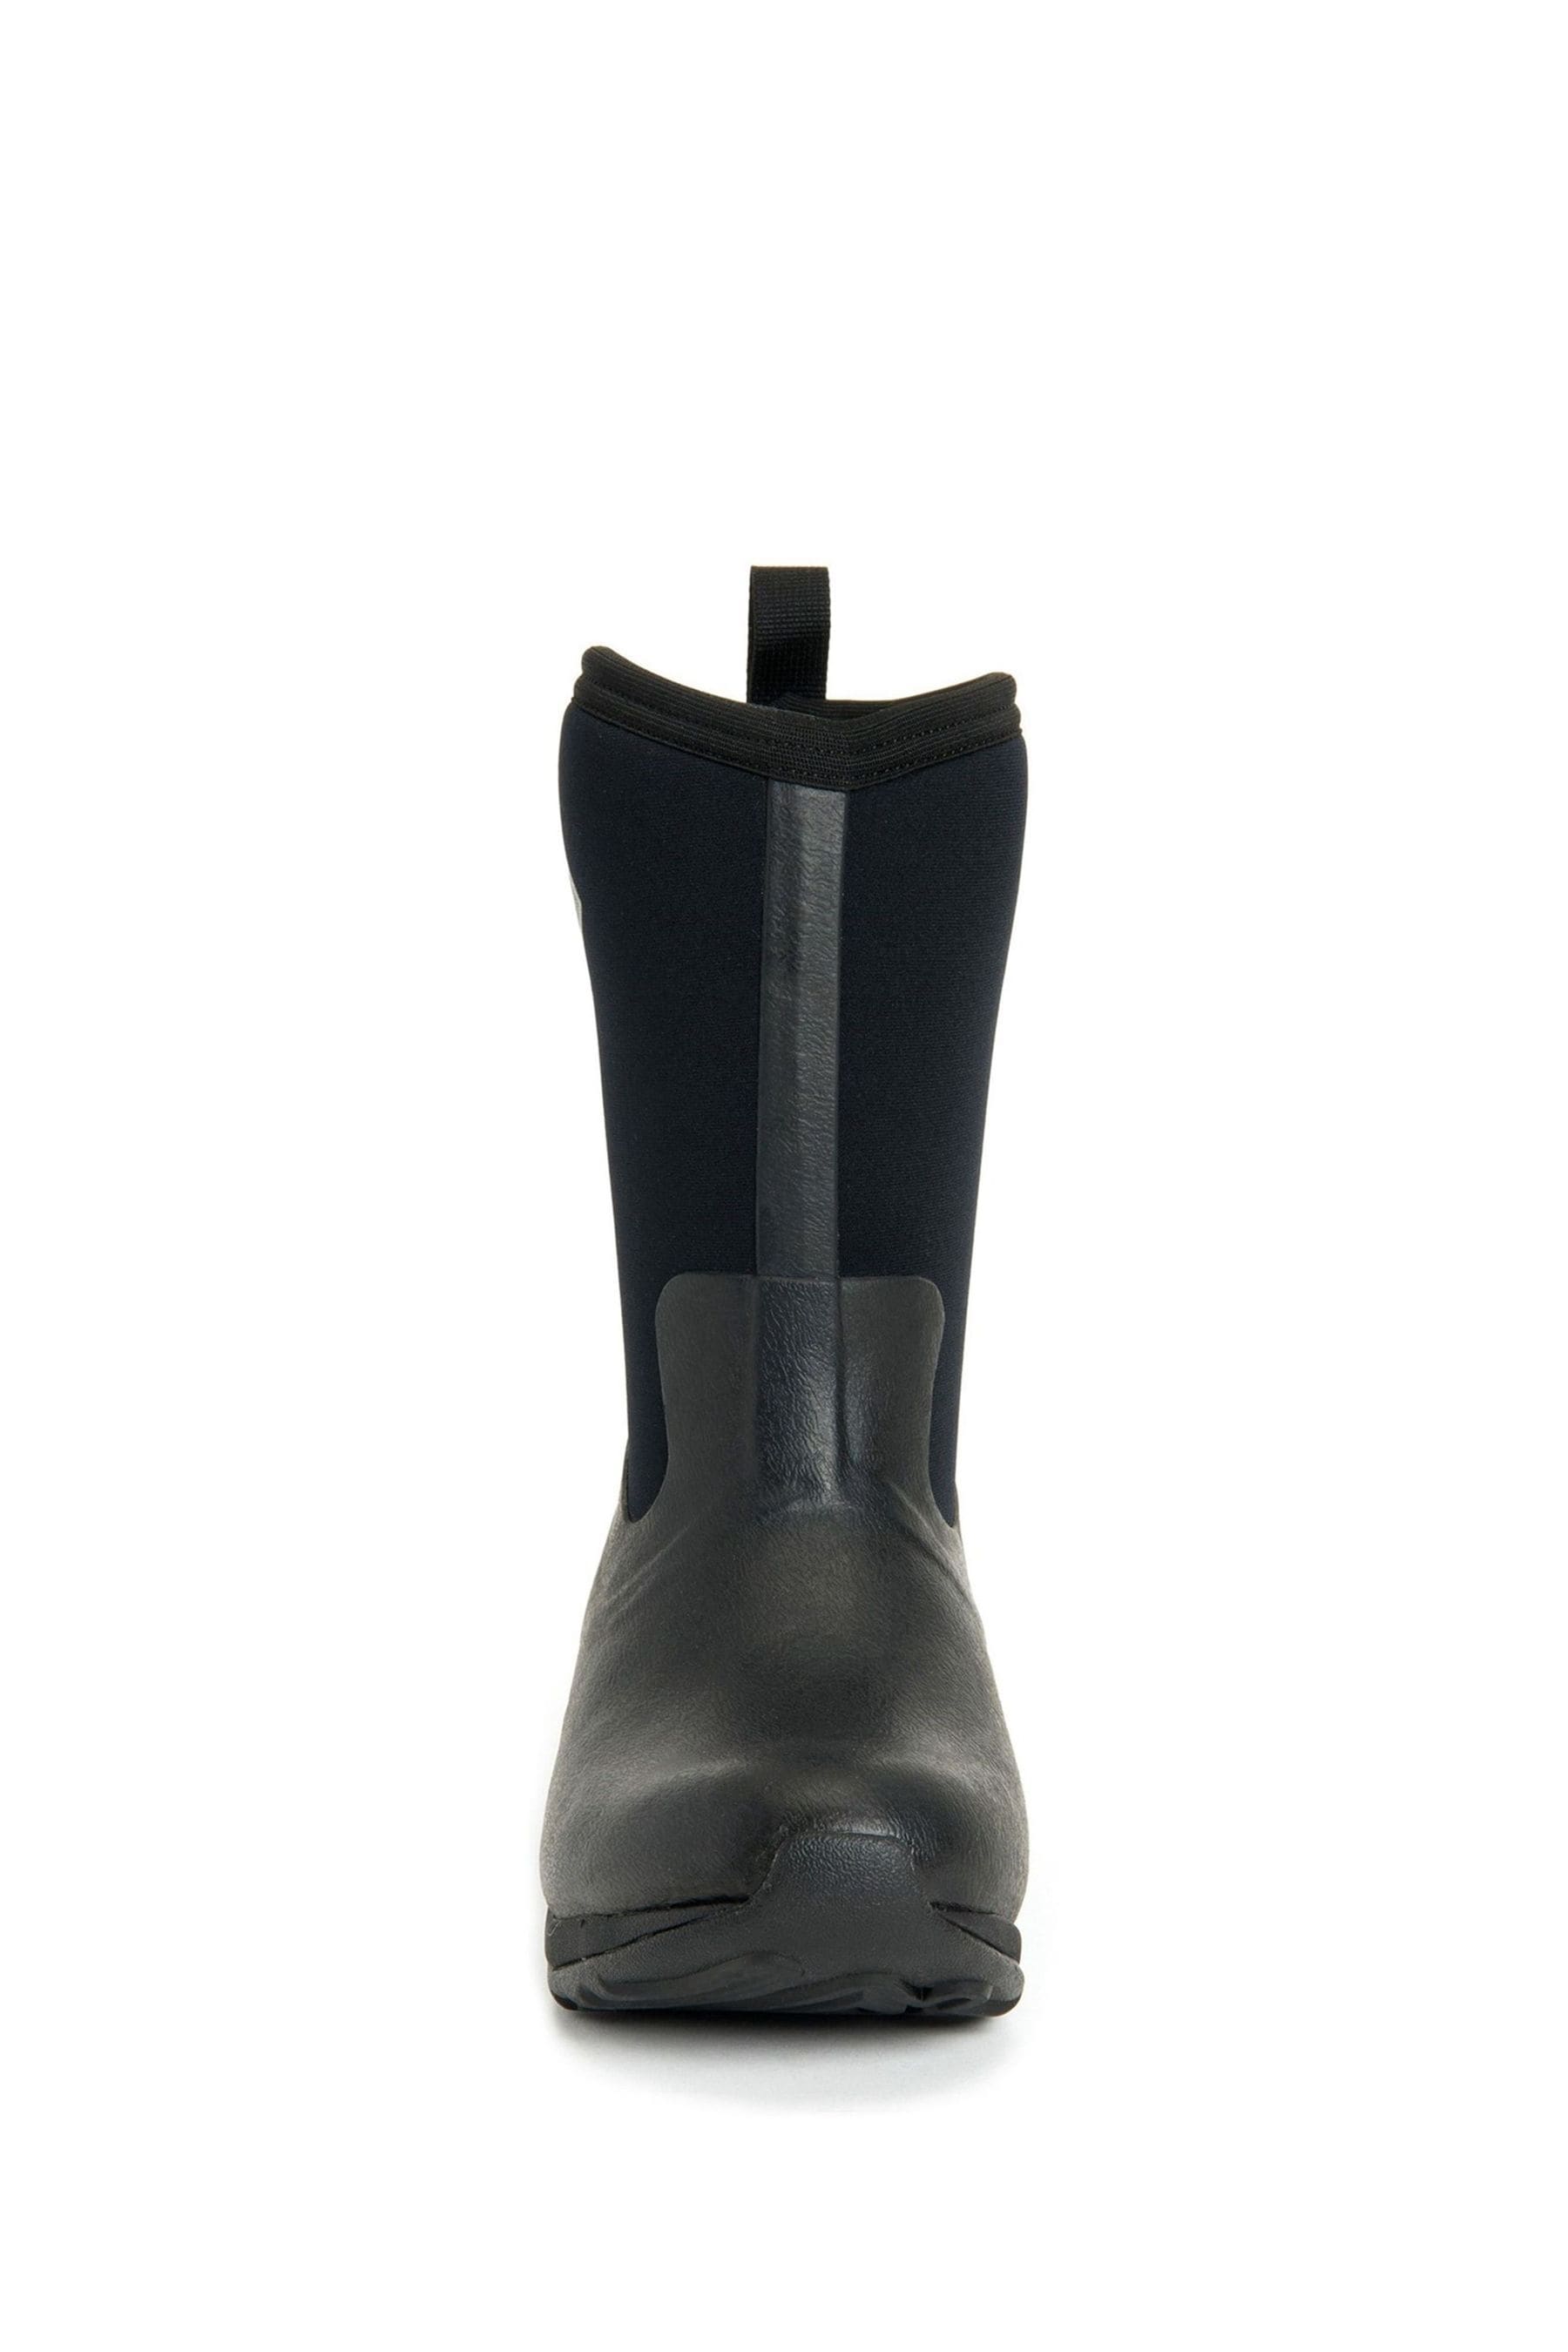 Buy Muck Boots Arctic Weekend Pull-On Wellington Boots from the Next UK ...